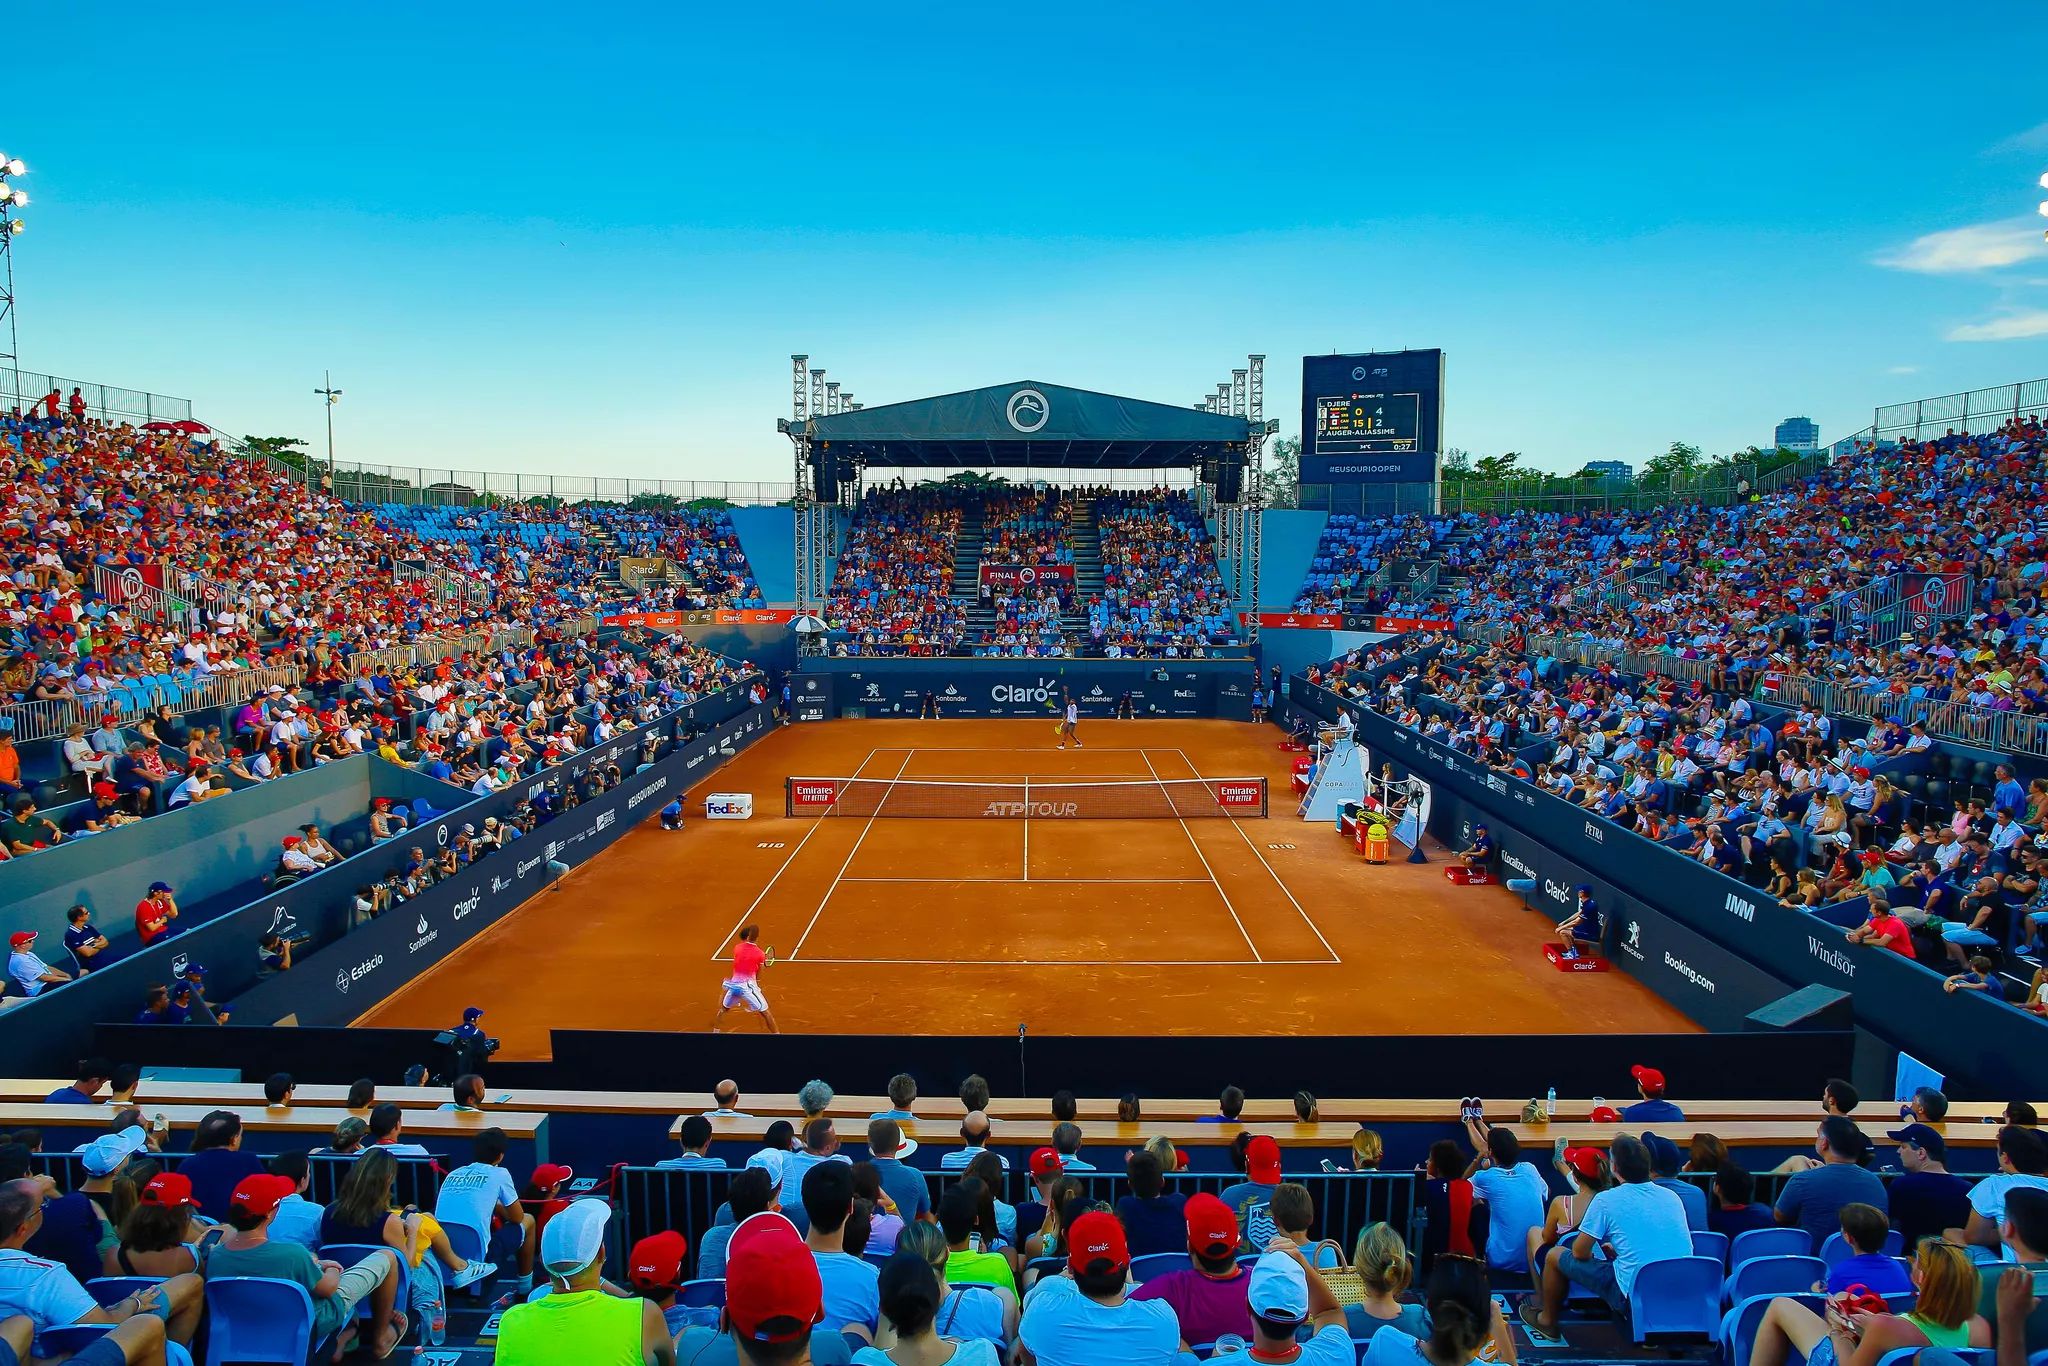 Rio Open in Brazil, South America | Tennis - Rated 4.2